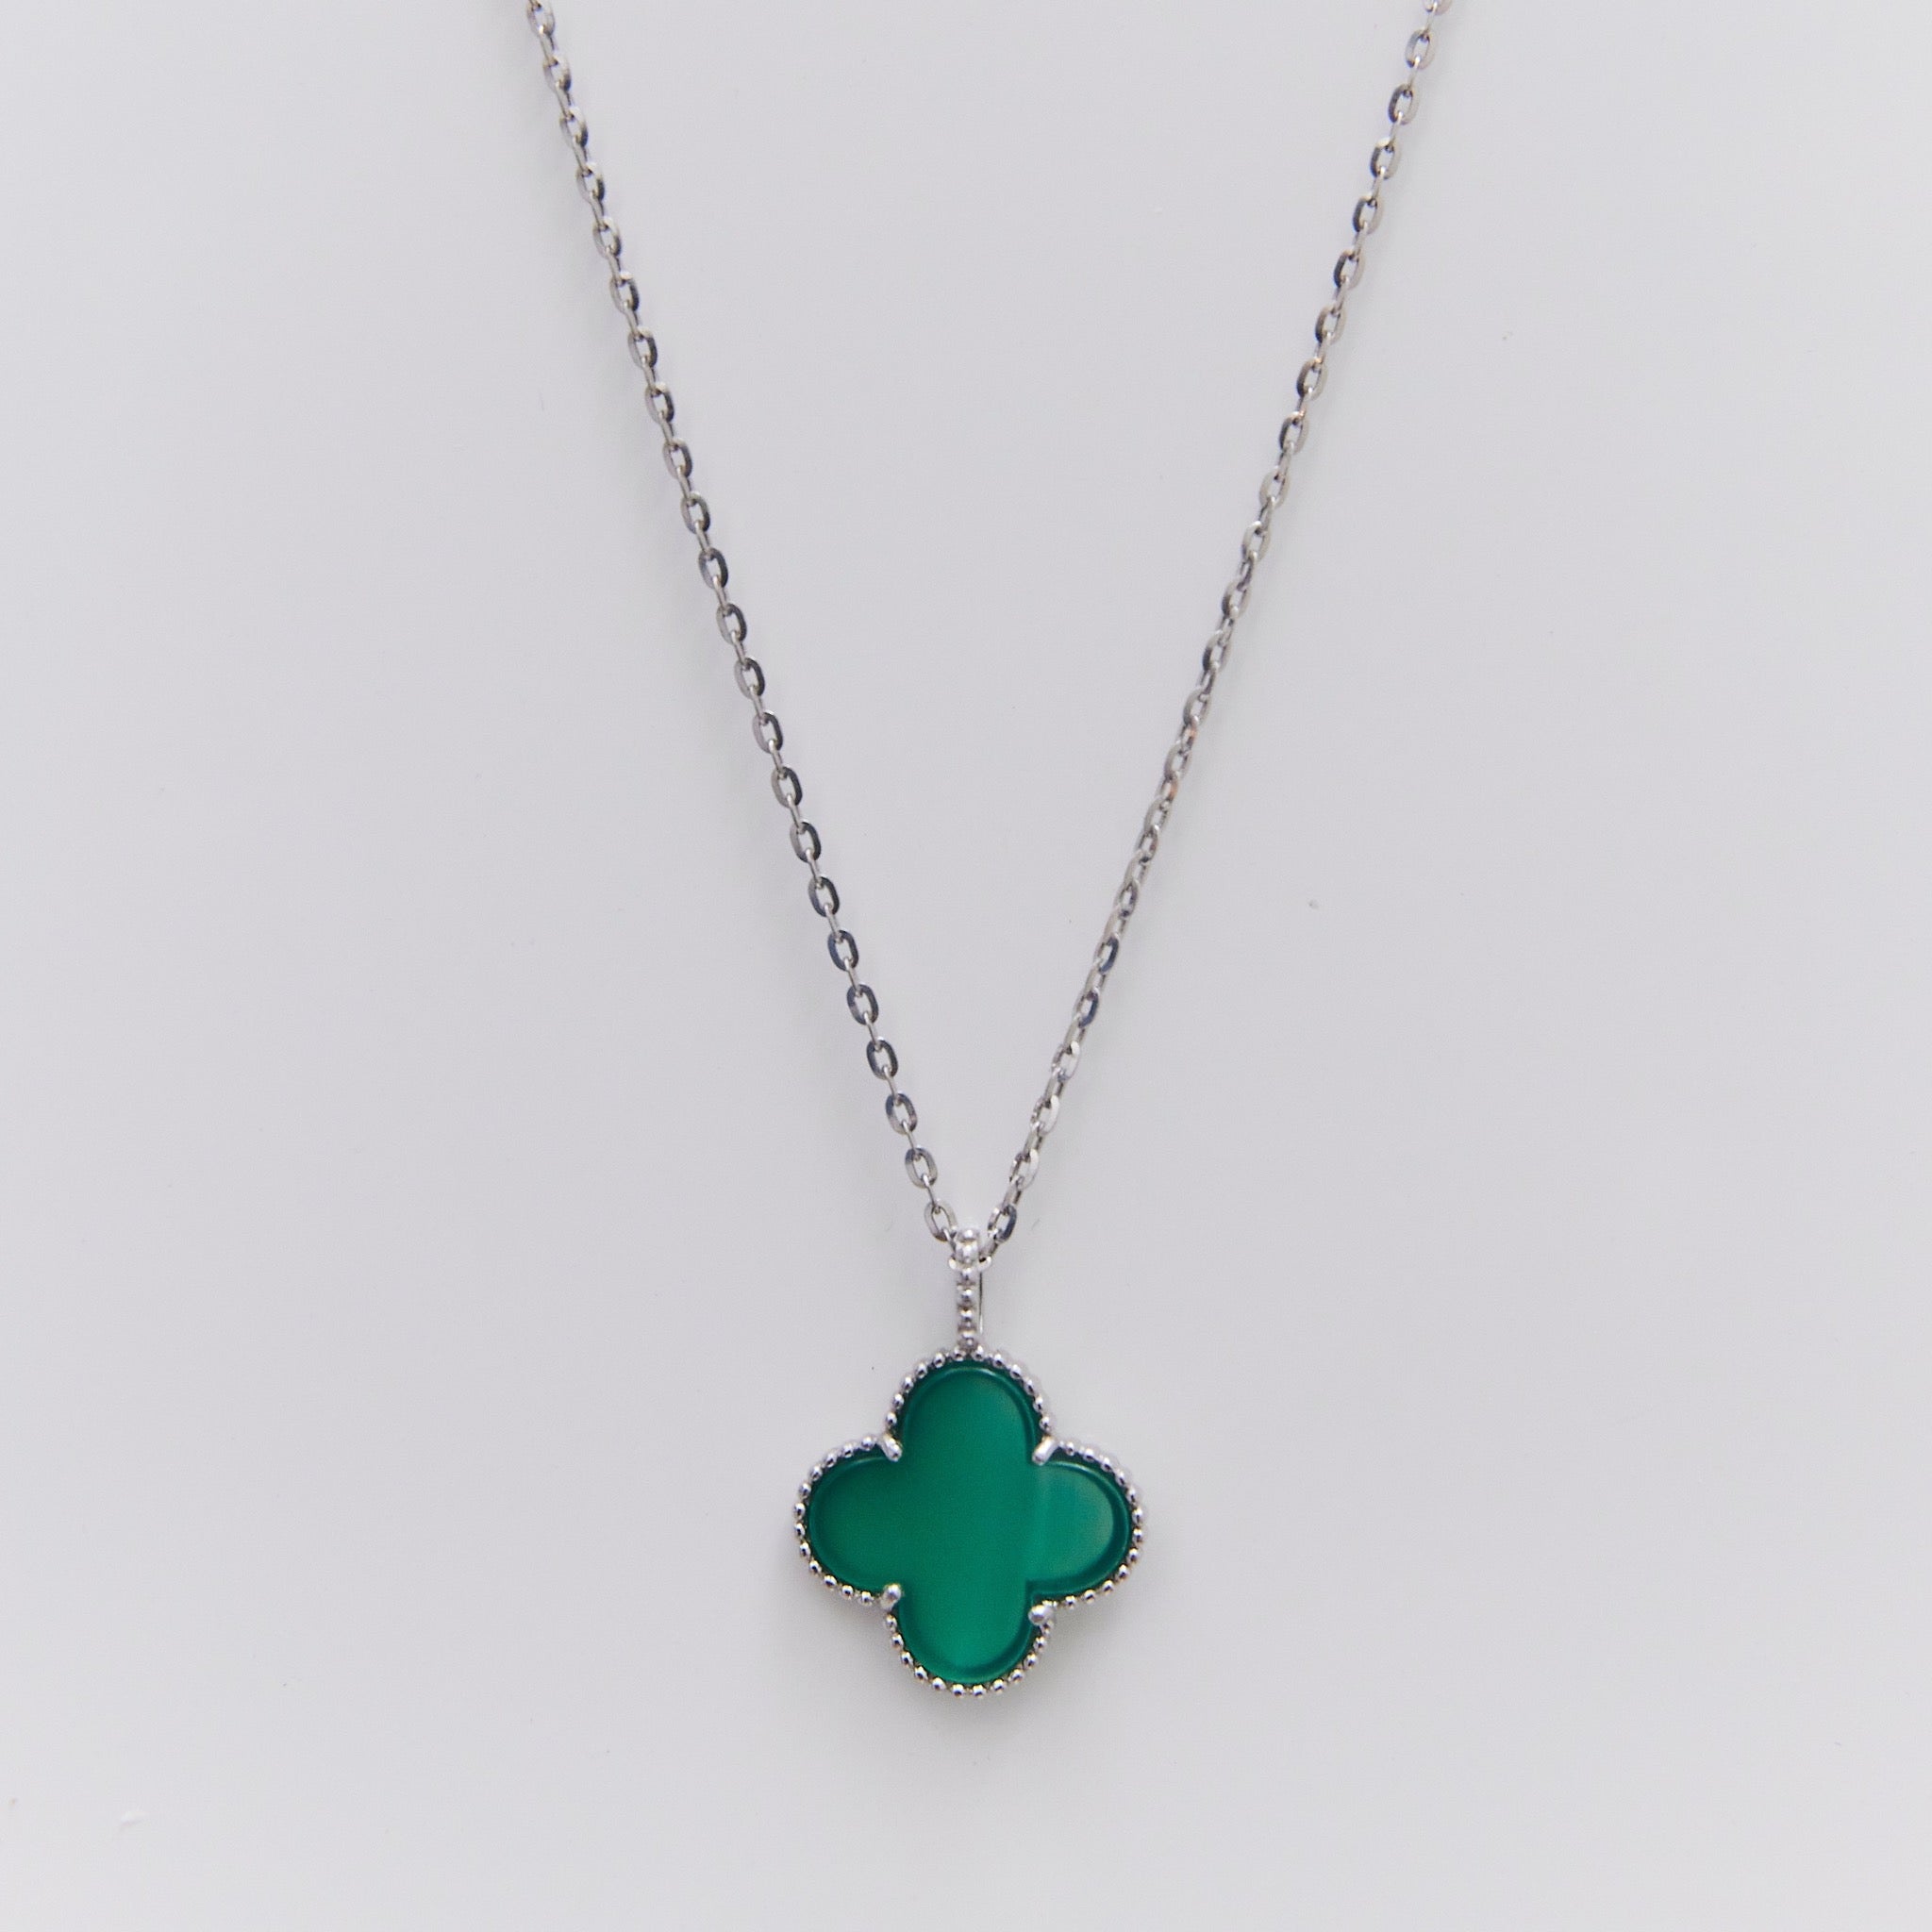 Four Leaf Clover Green Agate Pendant Necklace Sterling Silver